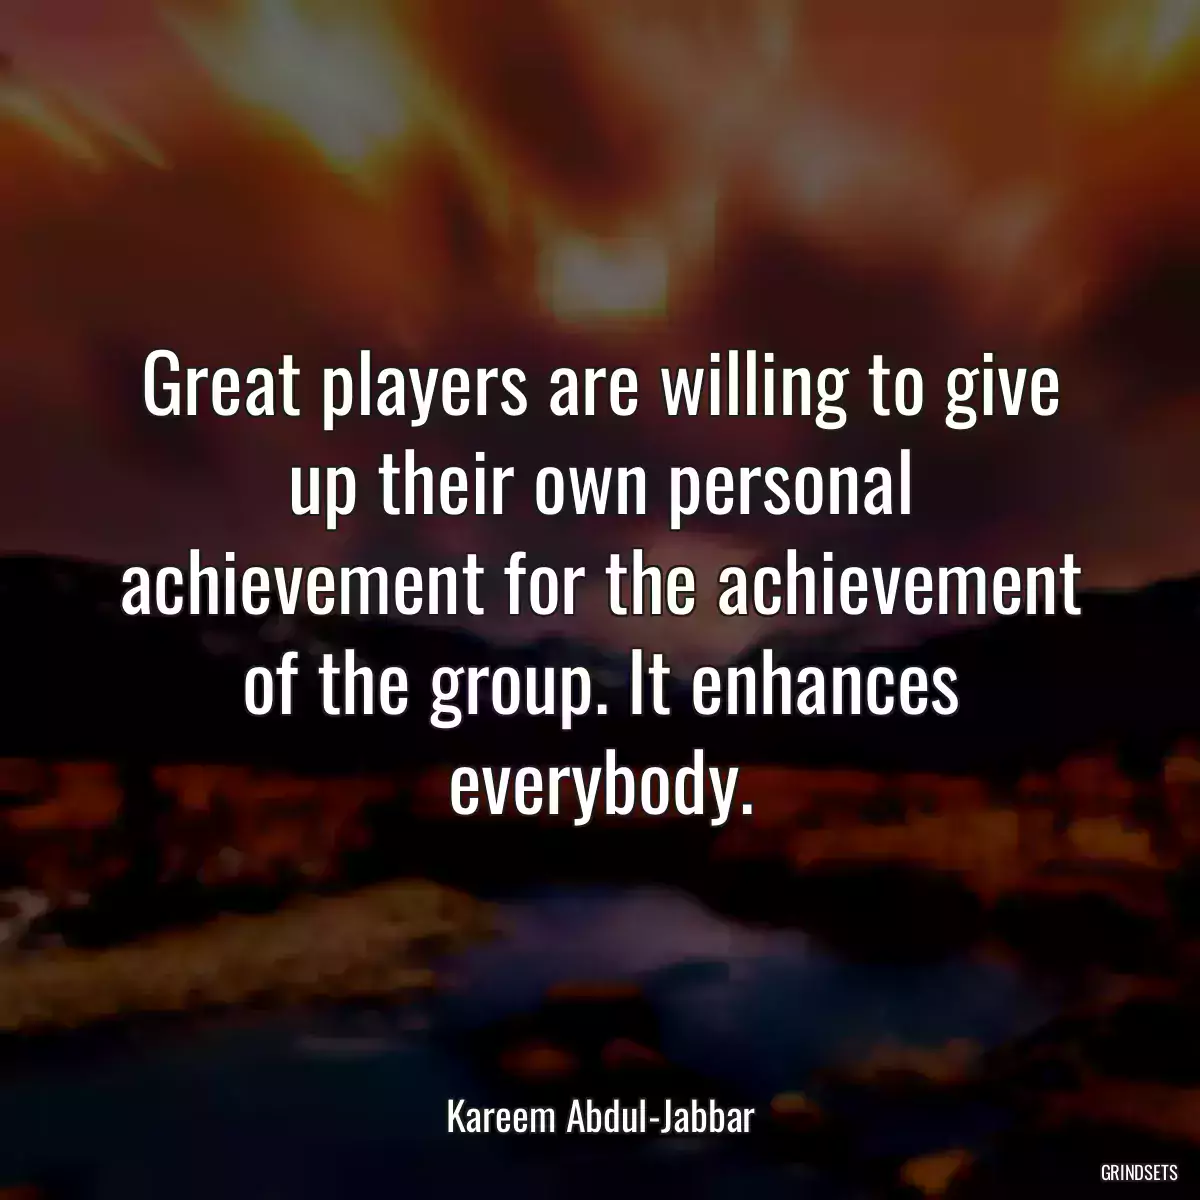 Great players are willing to give up their own personal achievement for the achievement of the group. It enhances everybody.